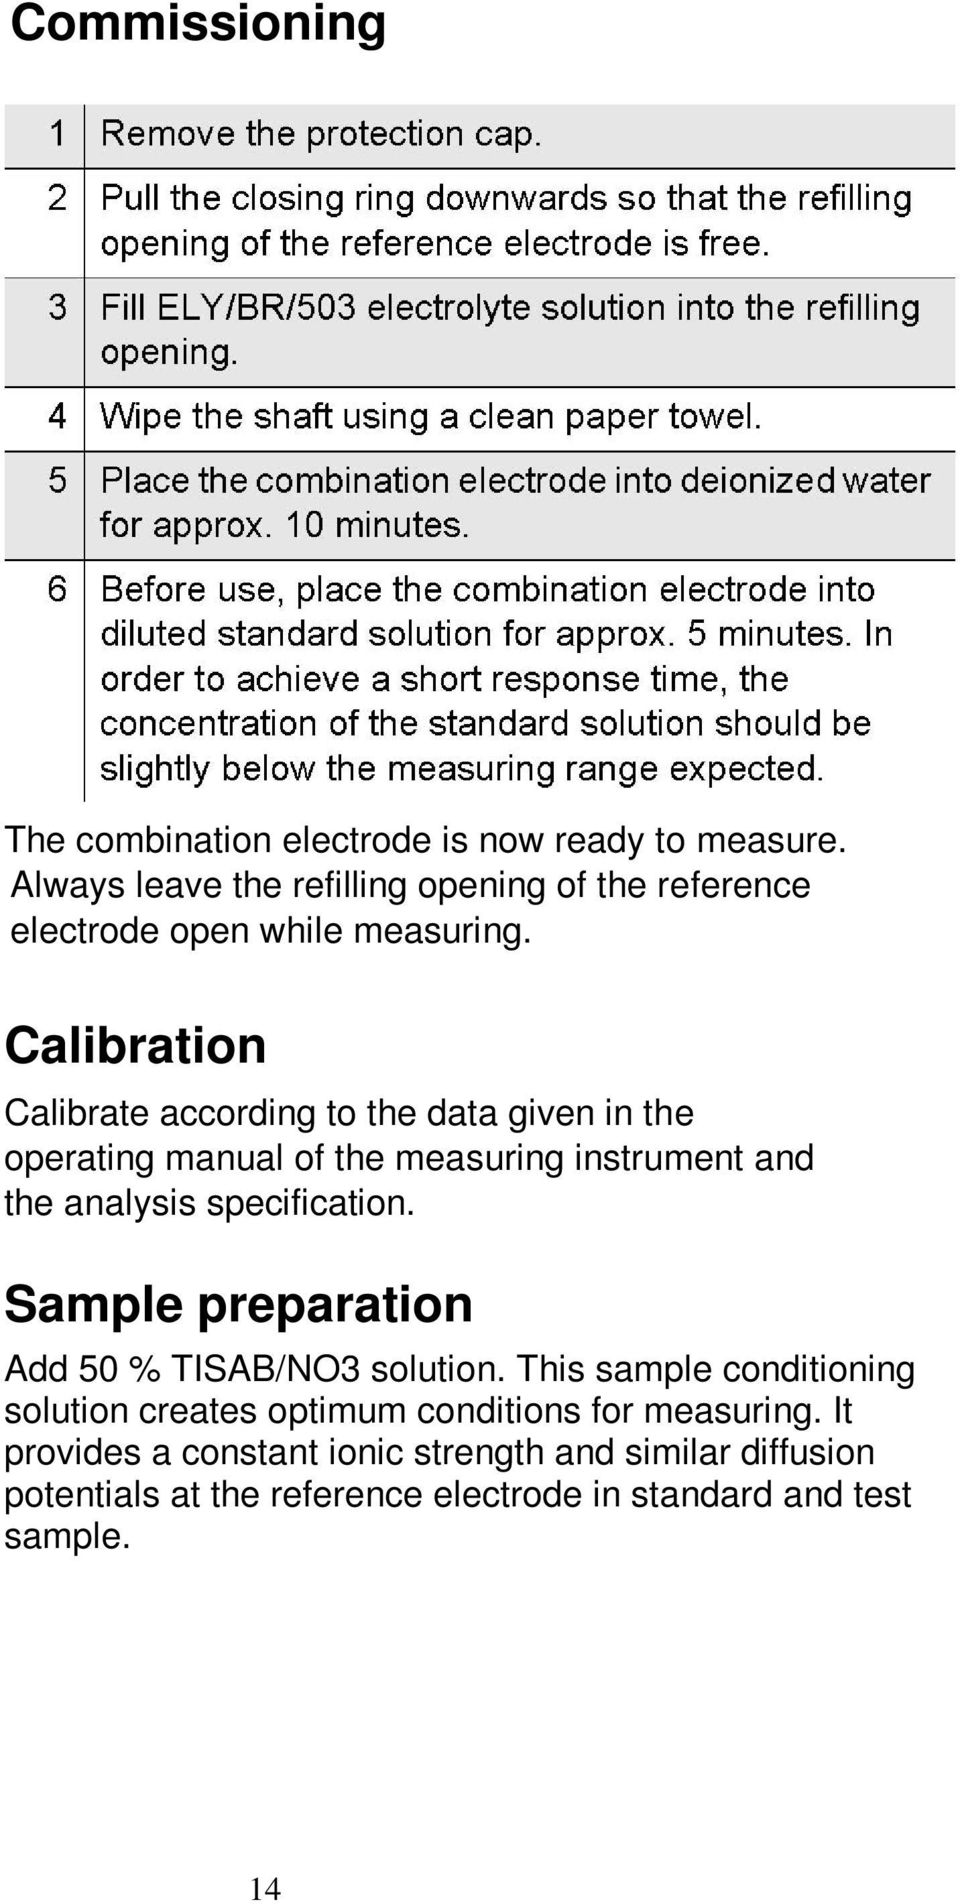 Calibration Calibrate according to the data given in the operating manual of the measuring instrument and the analysis specification.